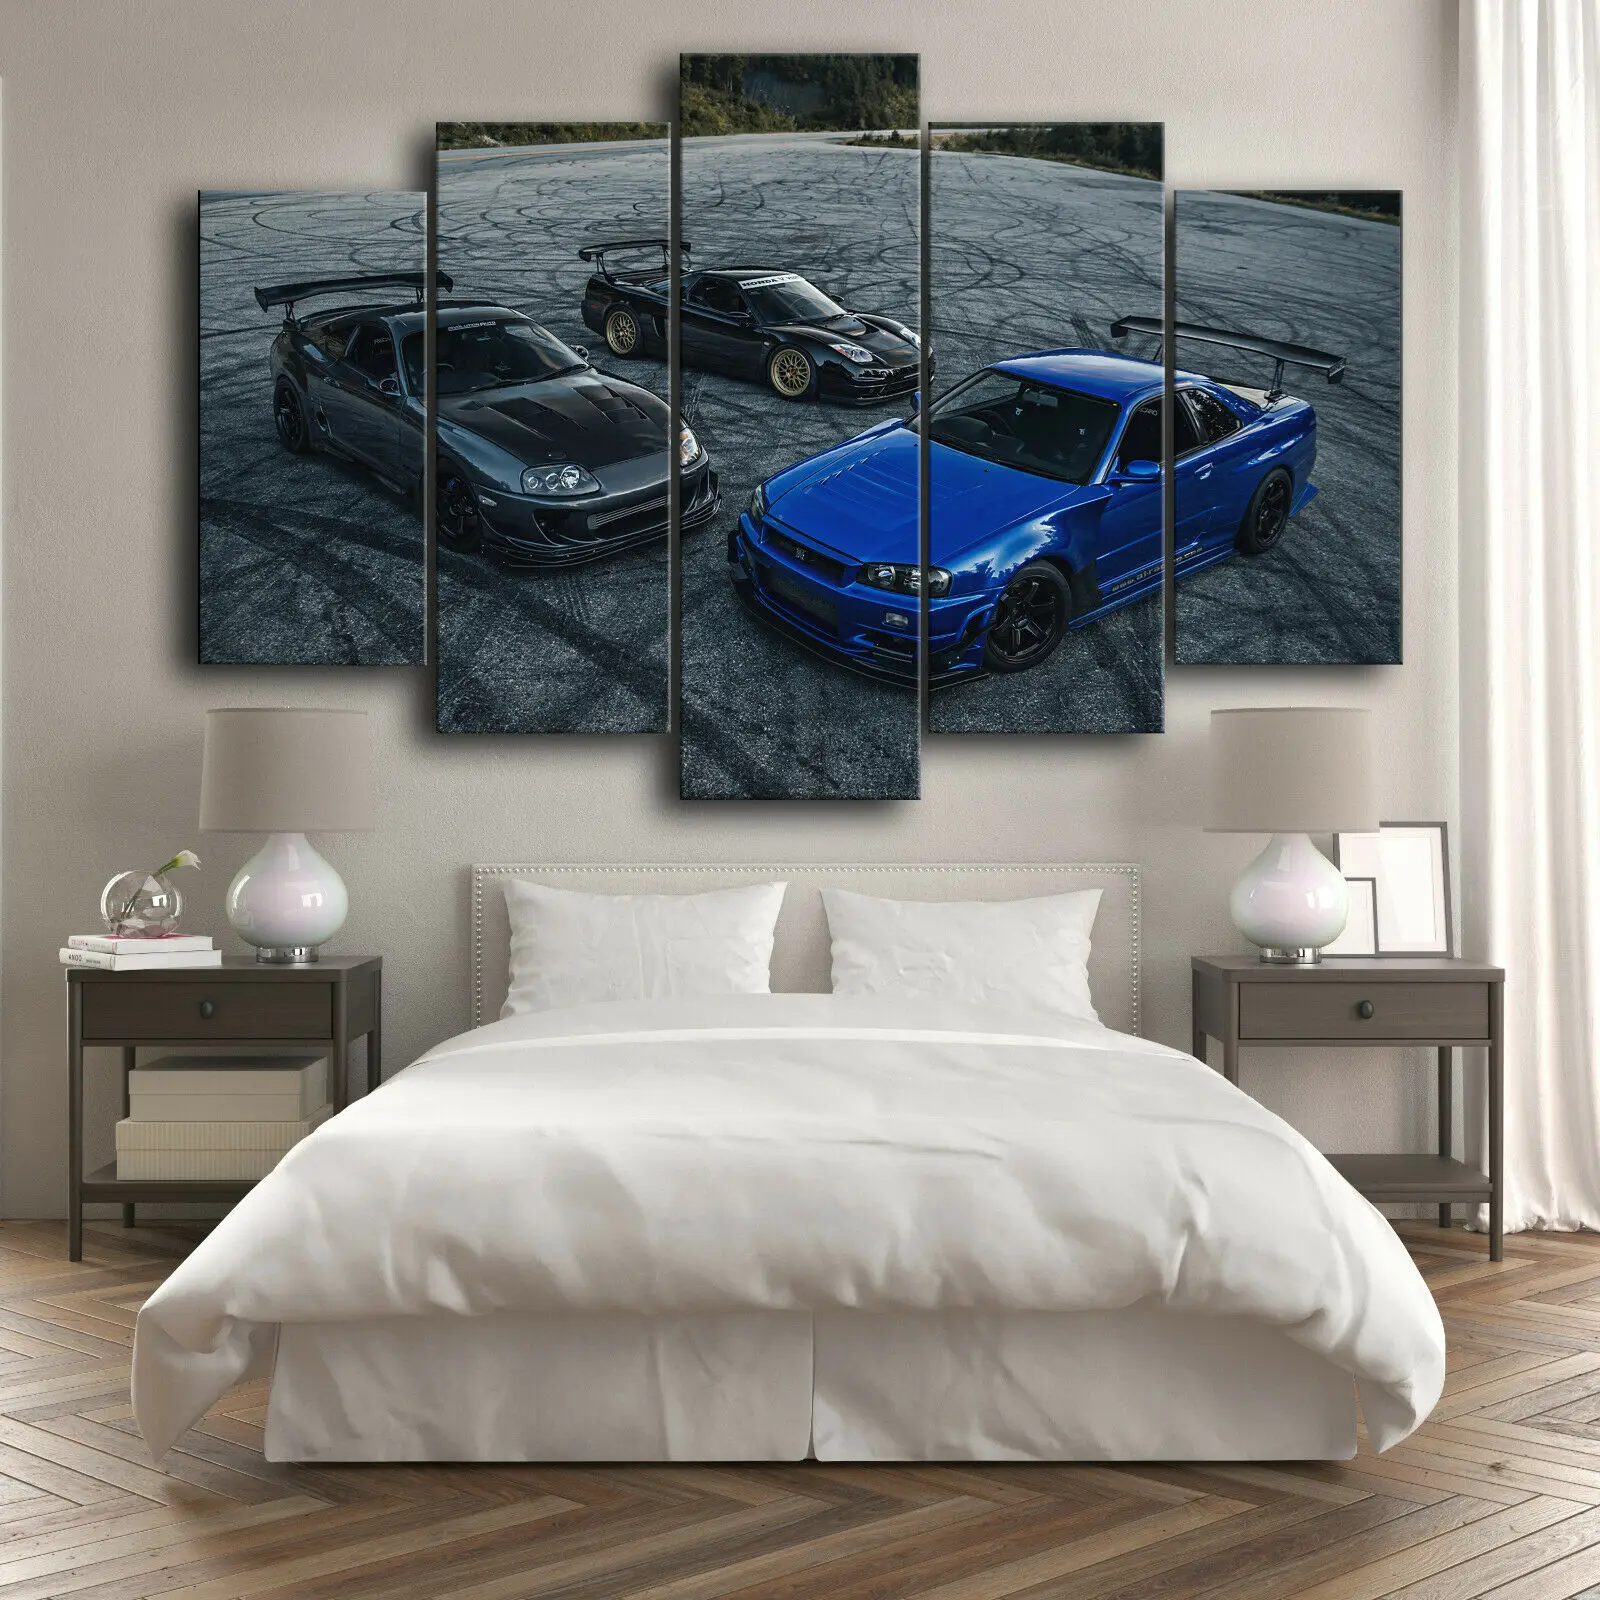 

No Framed JDM NSX Nissan Skyline Supra 5 piece Wall Art Canvas Print Posters Paintings Living Room Home Decor Pictures